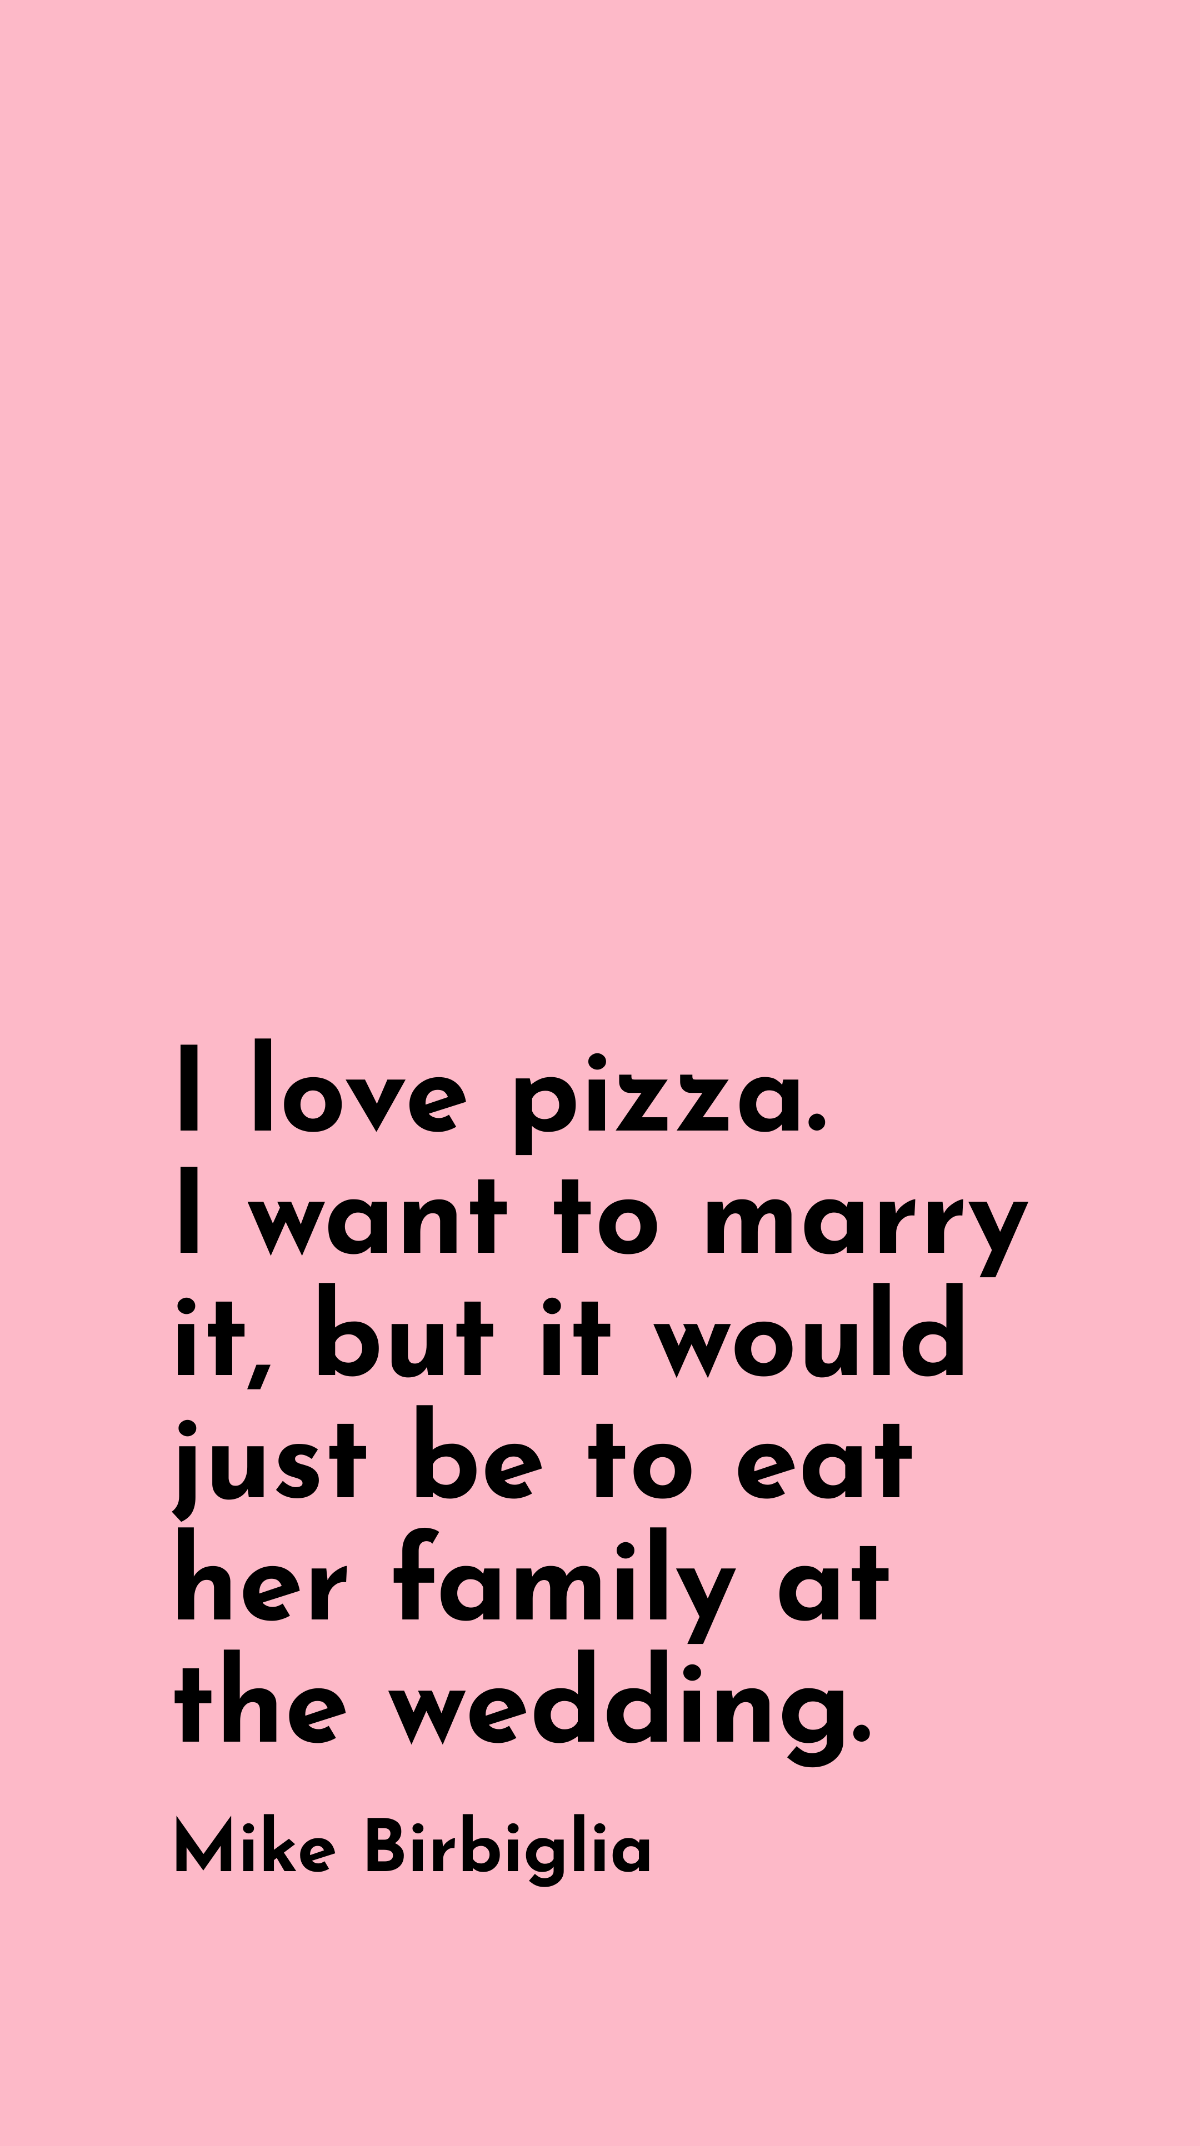 Mike Birbiglia - I love pizza. I want to marry it, but it would just be to eat her family at the wedding. Template